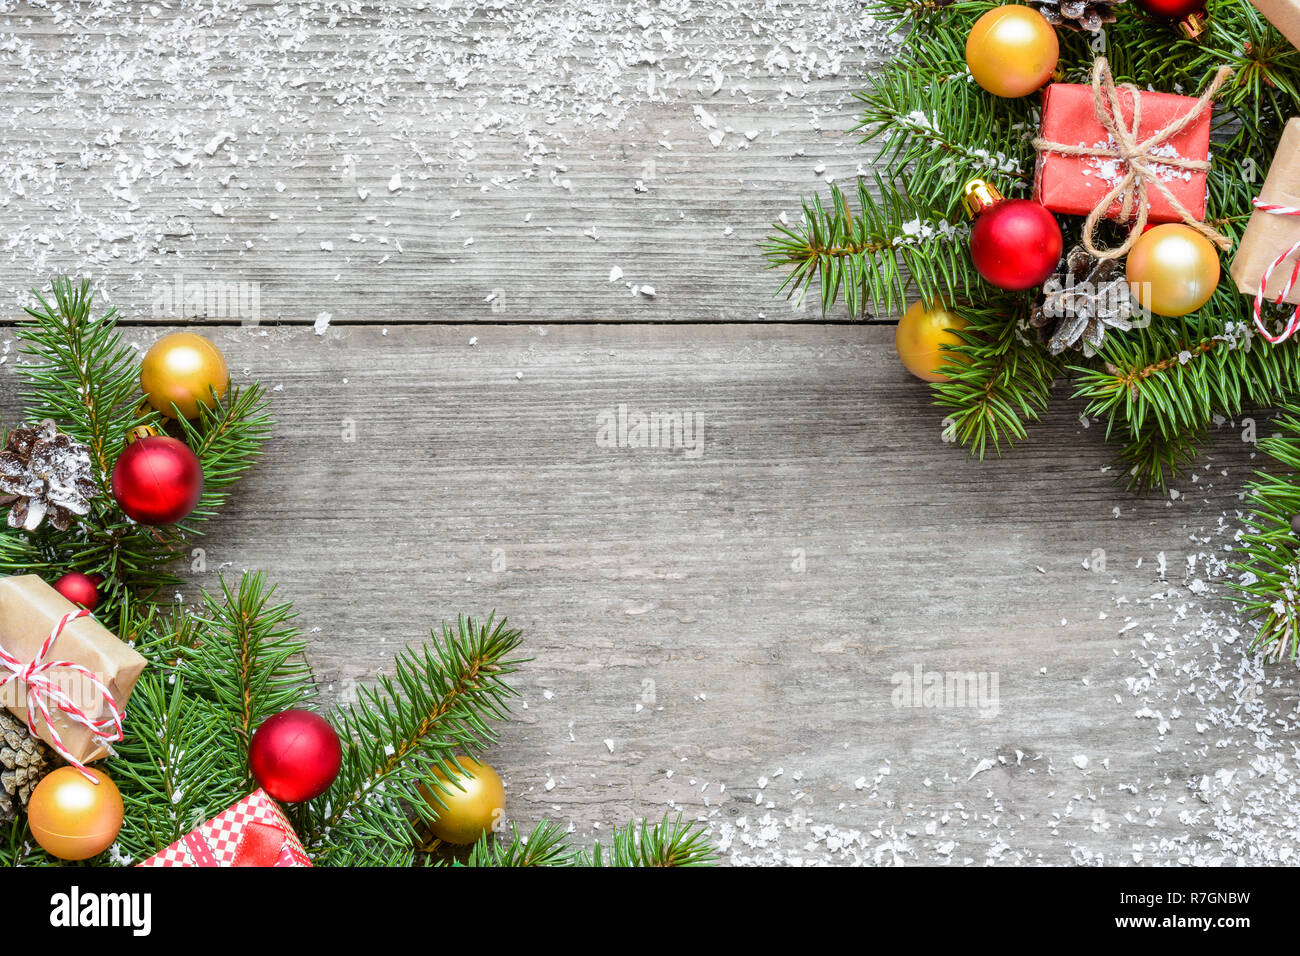 Christmas background with fir branches, decorations, gift boxes and pine cones on rustic wooden table covered with snow. Christmas background. Flat la Stock Photo